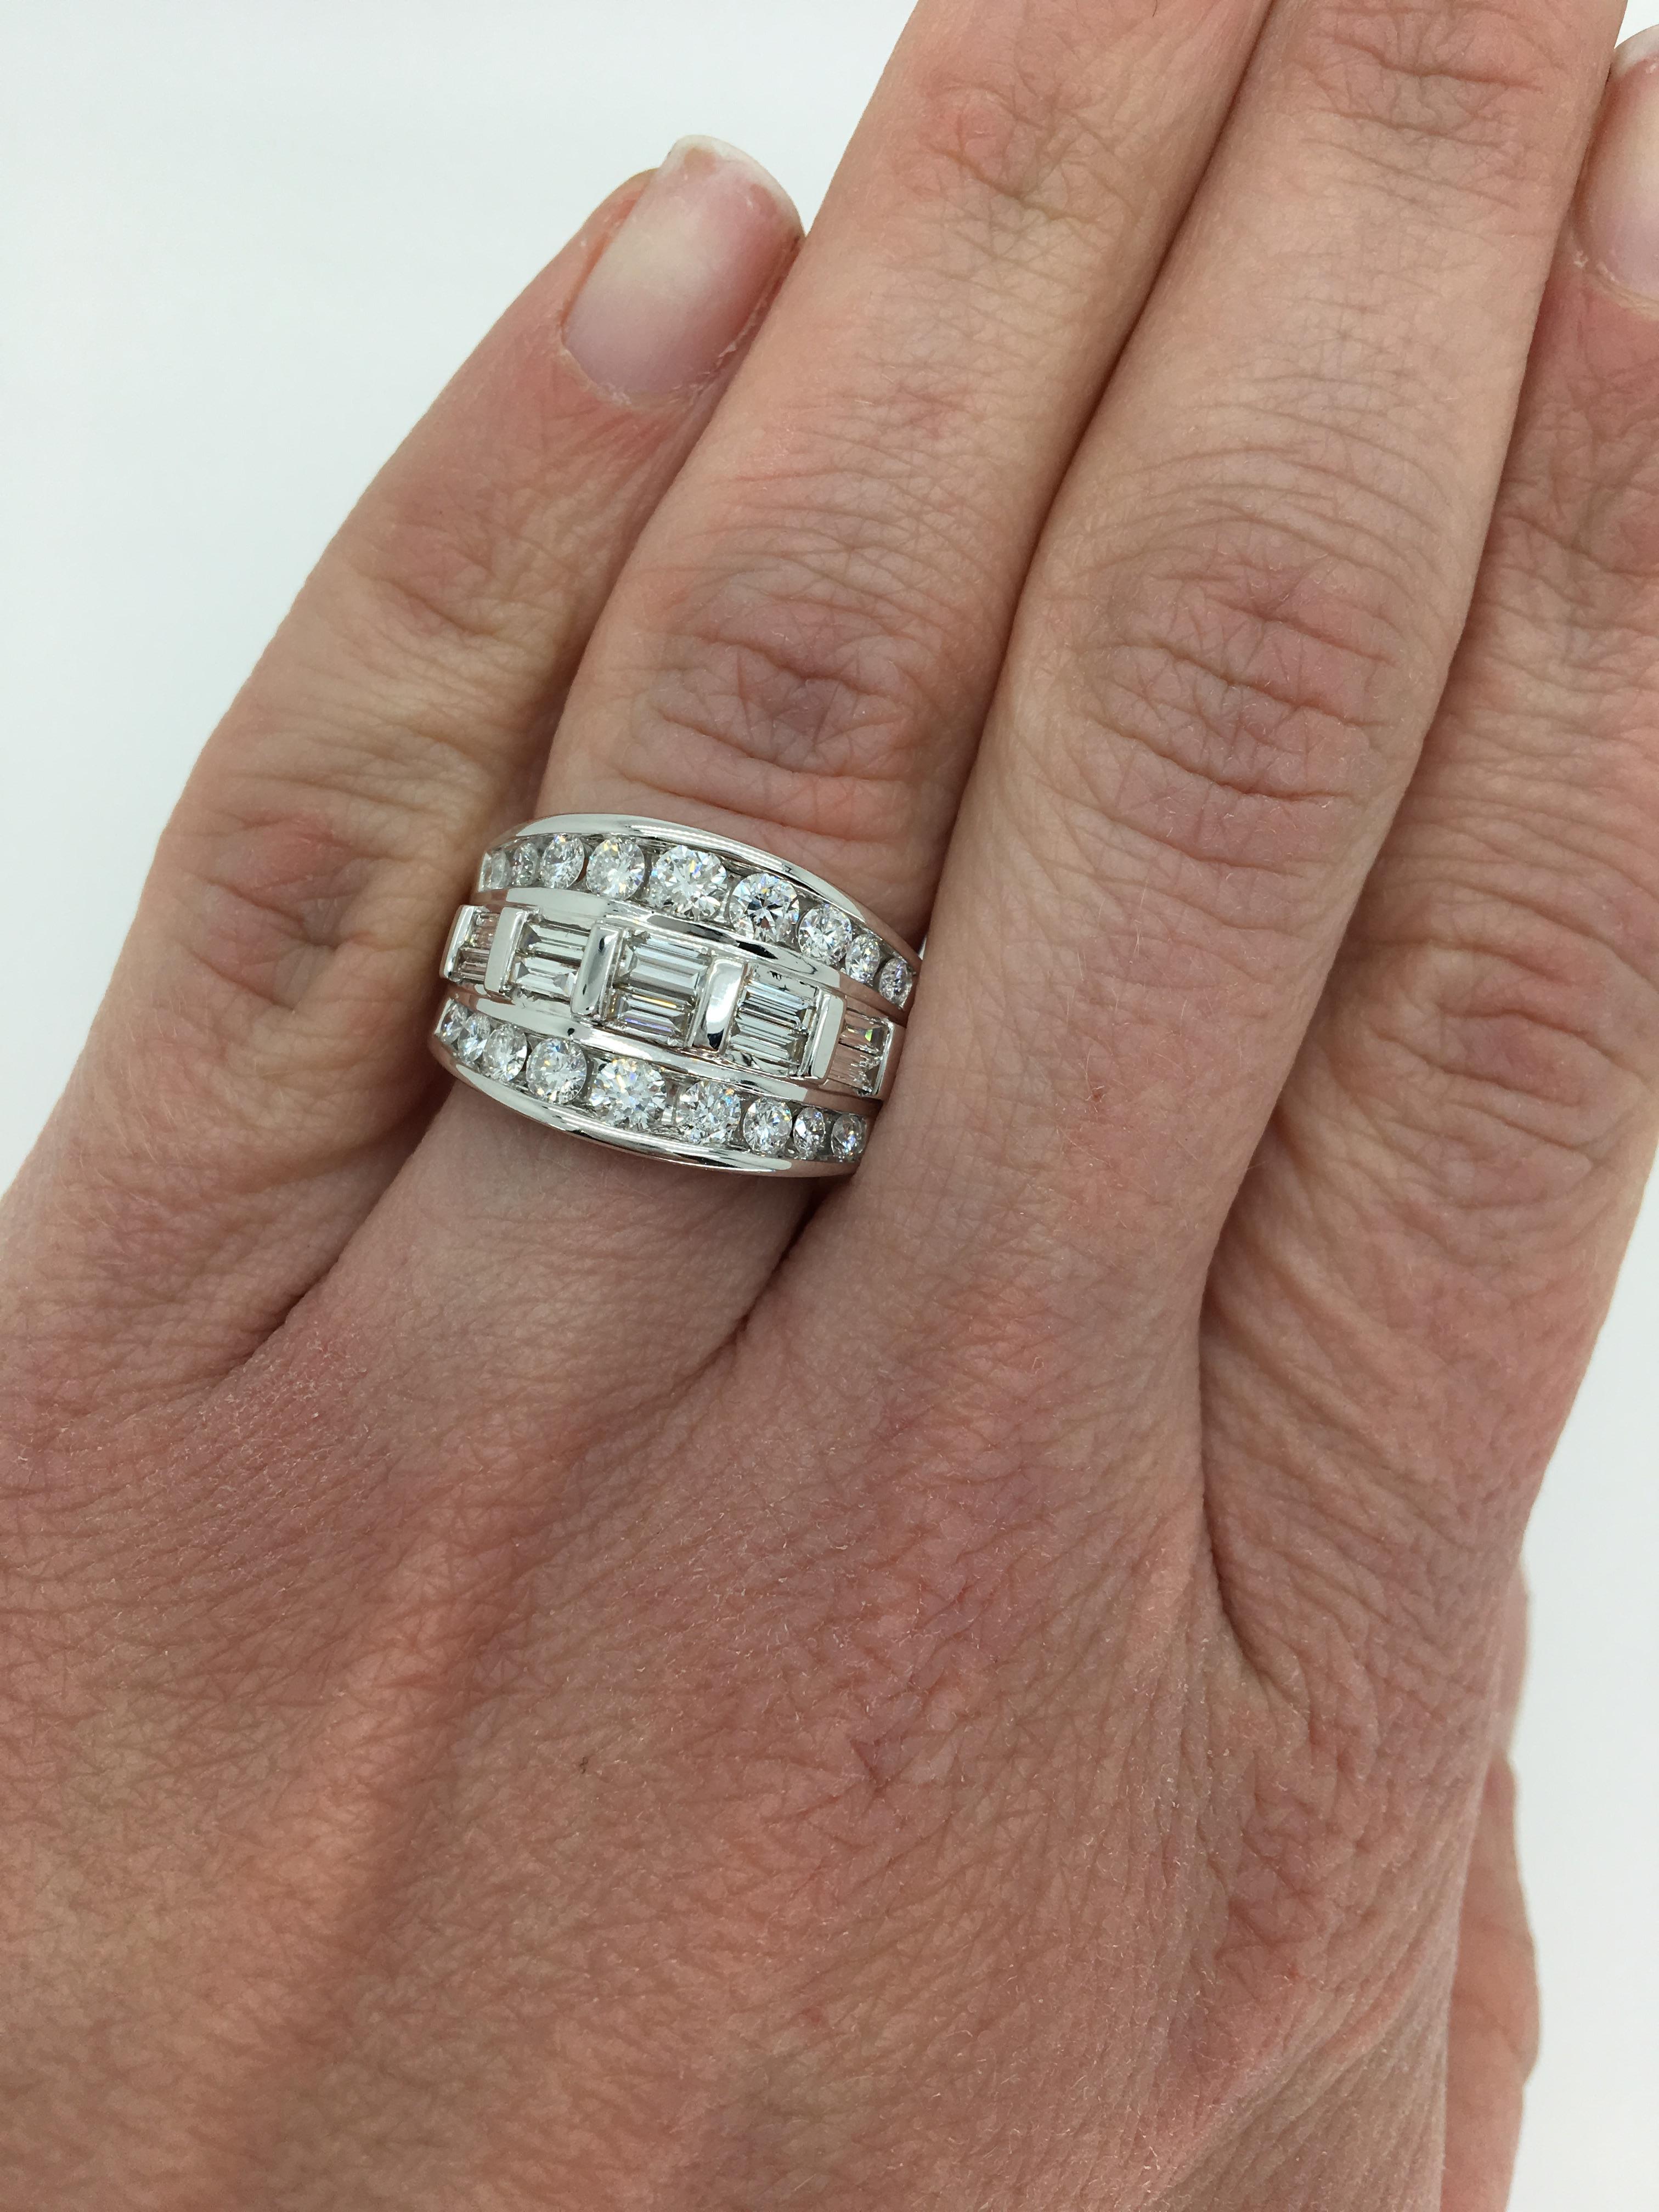 Approximately 2.00CTW Baguette Cut and Round Brilliant Cut diamond ring set in 14k white gold.

 
Diamond Cut: 10 Baguette Cut Diamonds and 12 Round Brilliant Cut Diamonds
Average Diamond Color: G-H
Average Diamond Clarity:  VS-SI
Diamond Carat